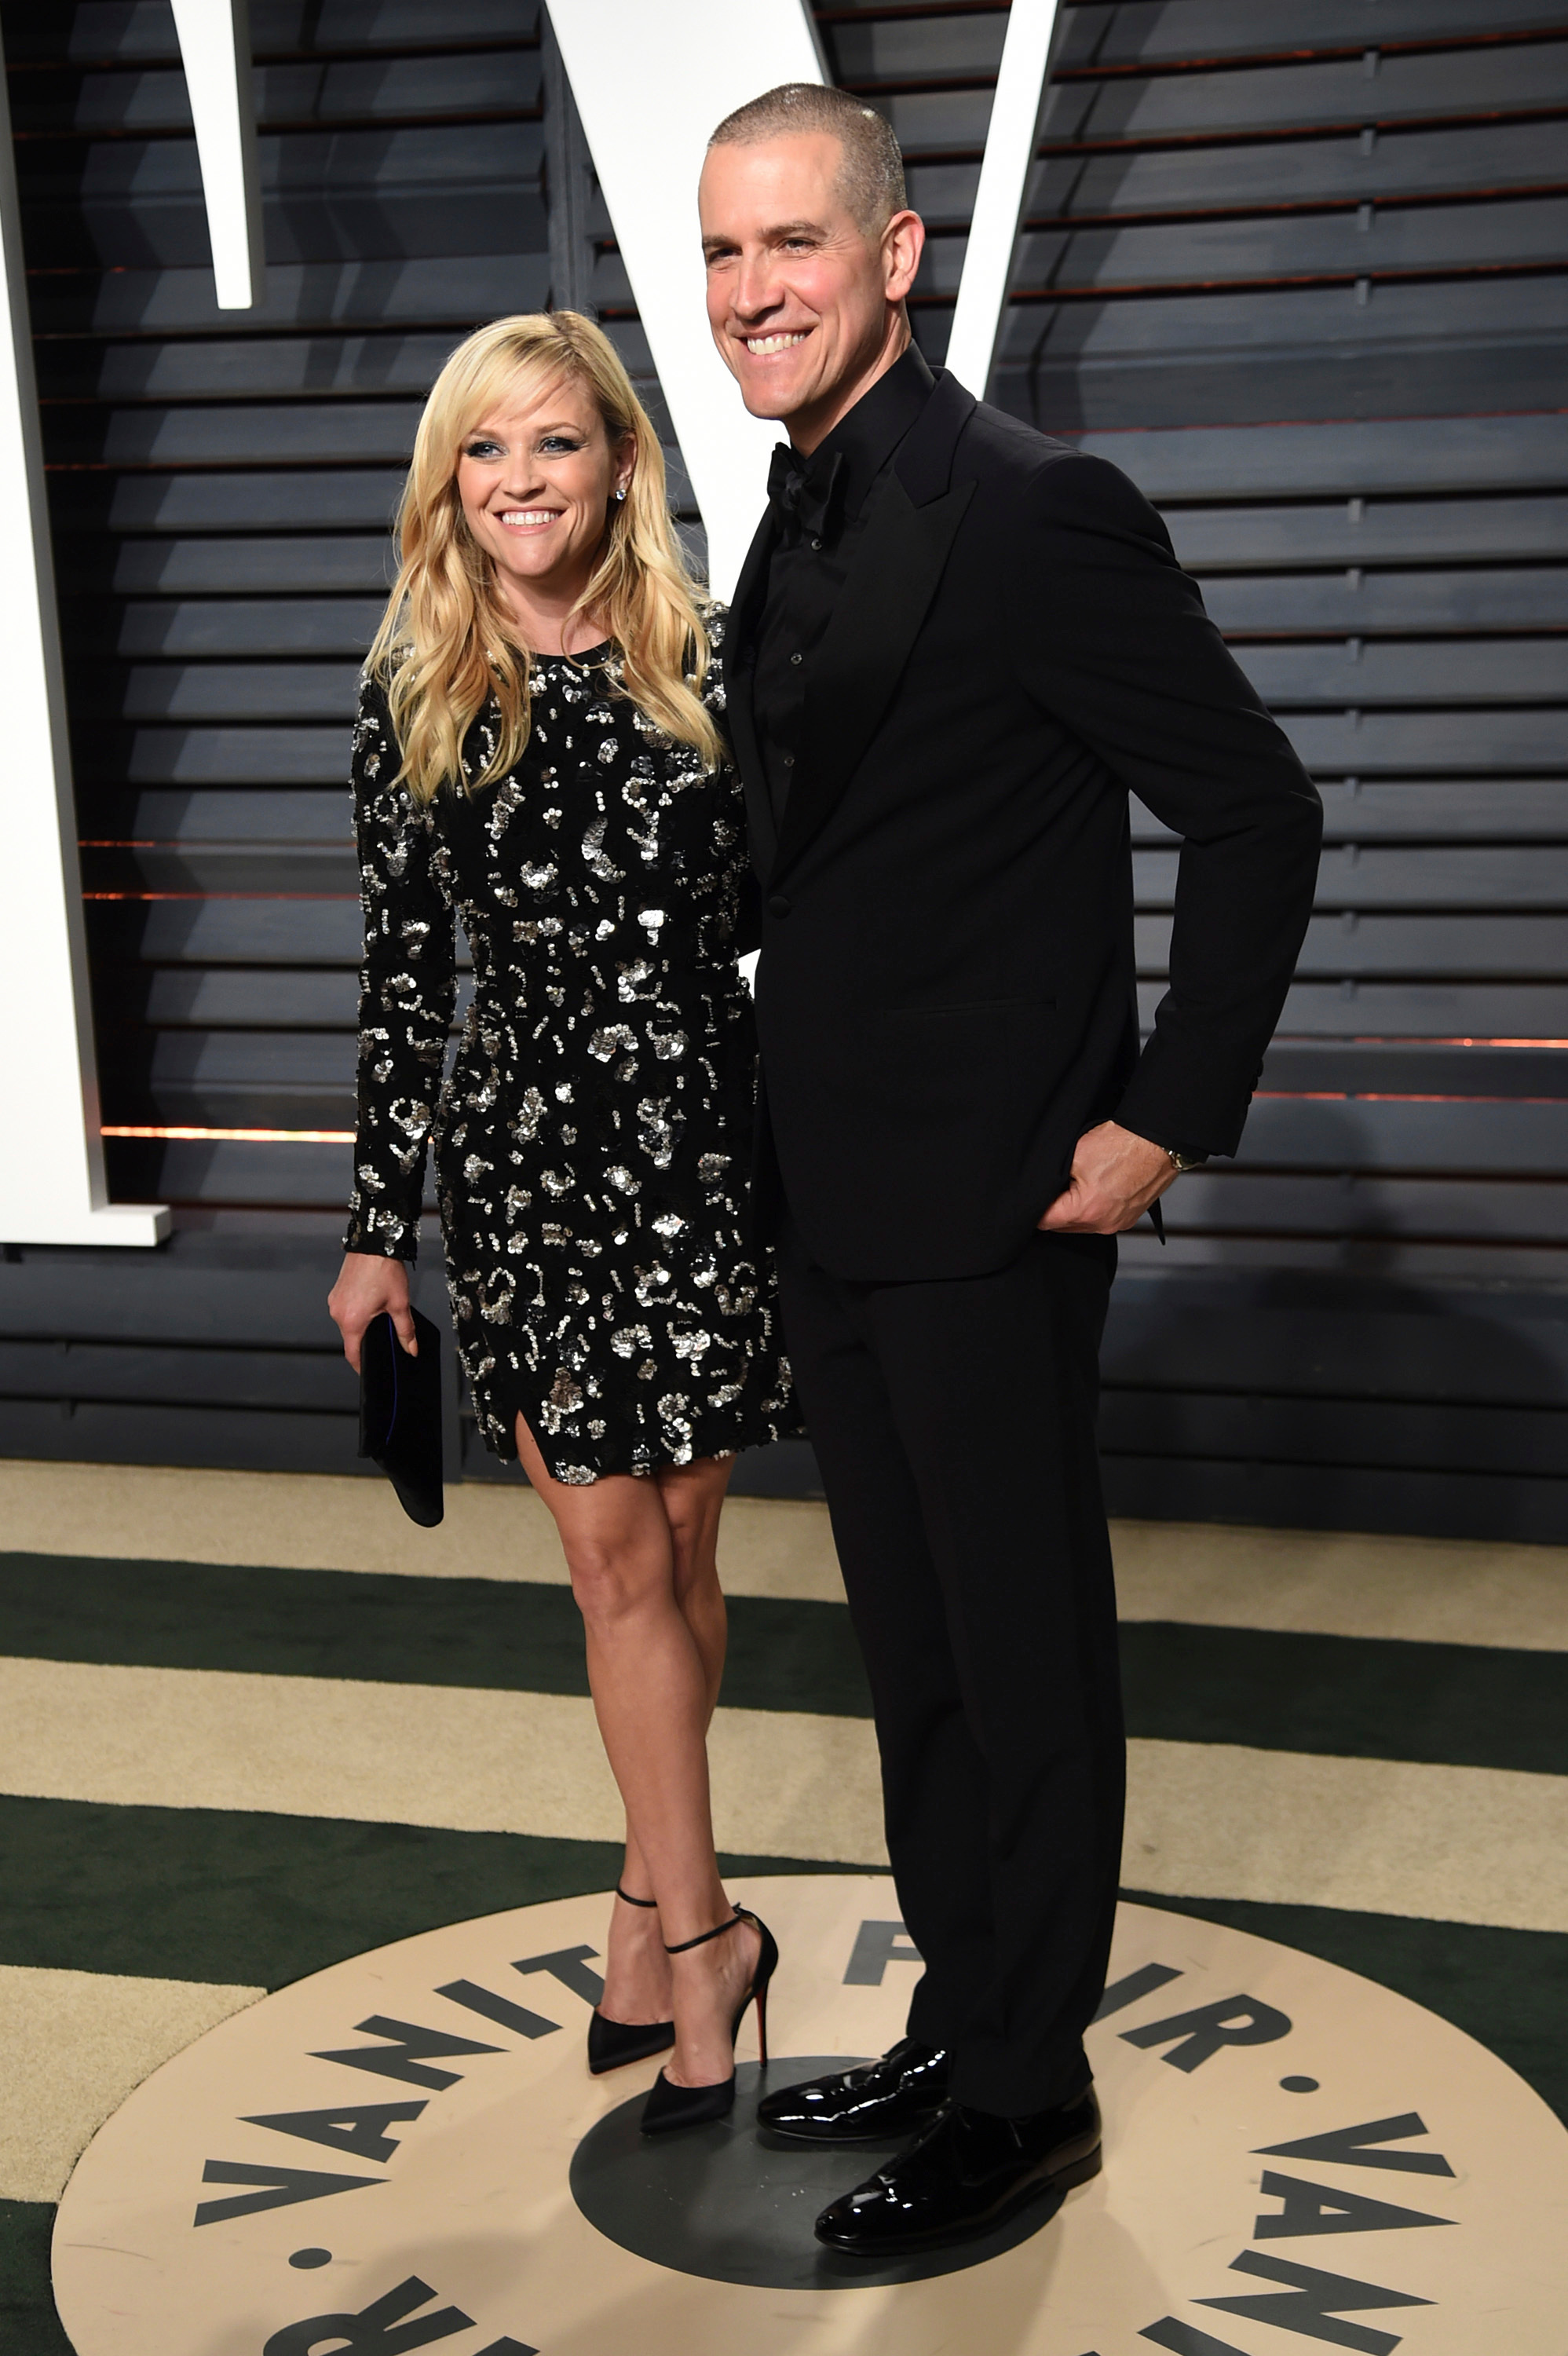 <p><a href="https://www.wonderwall.com/celebrity/profiles/overview/reese-witherspoon-382.article">Reese Witherspoon</a> met second husband Jim Toth, a Hollywood talent agent, at a friend's party. But it was a messy introduction. "It happened out of the blue," she told ELLE in 2013. "This really drunk guy was hitting on me, making such an idiot of himself, yelling at me... Jim came over and said, 'Please excuse my friend. He's just broken up with someone.'" Reese was impressed. "Jim was a really good friend, pulling [his drunk friend] out of that situation. That's just kind of who he is, a really good person." They married in 2011 and welcomed son Tennessee the following year.</p>